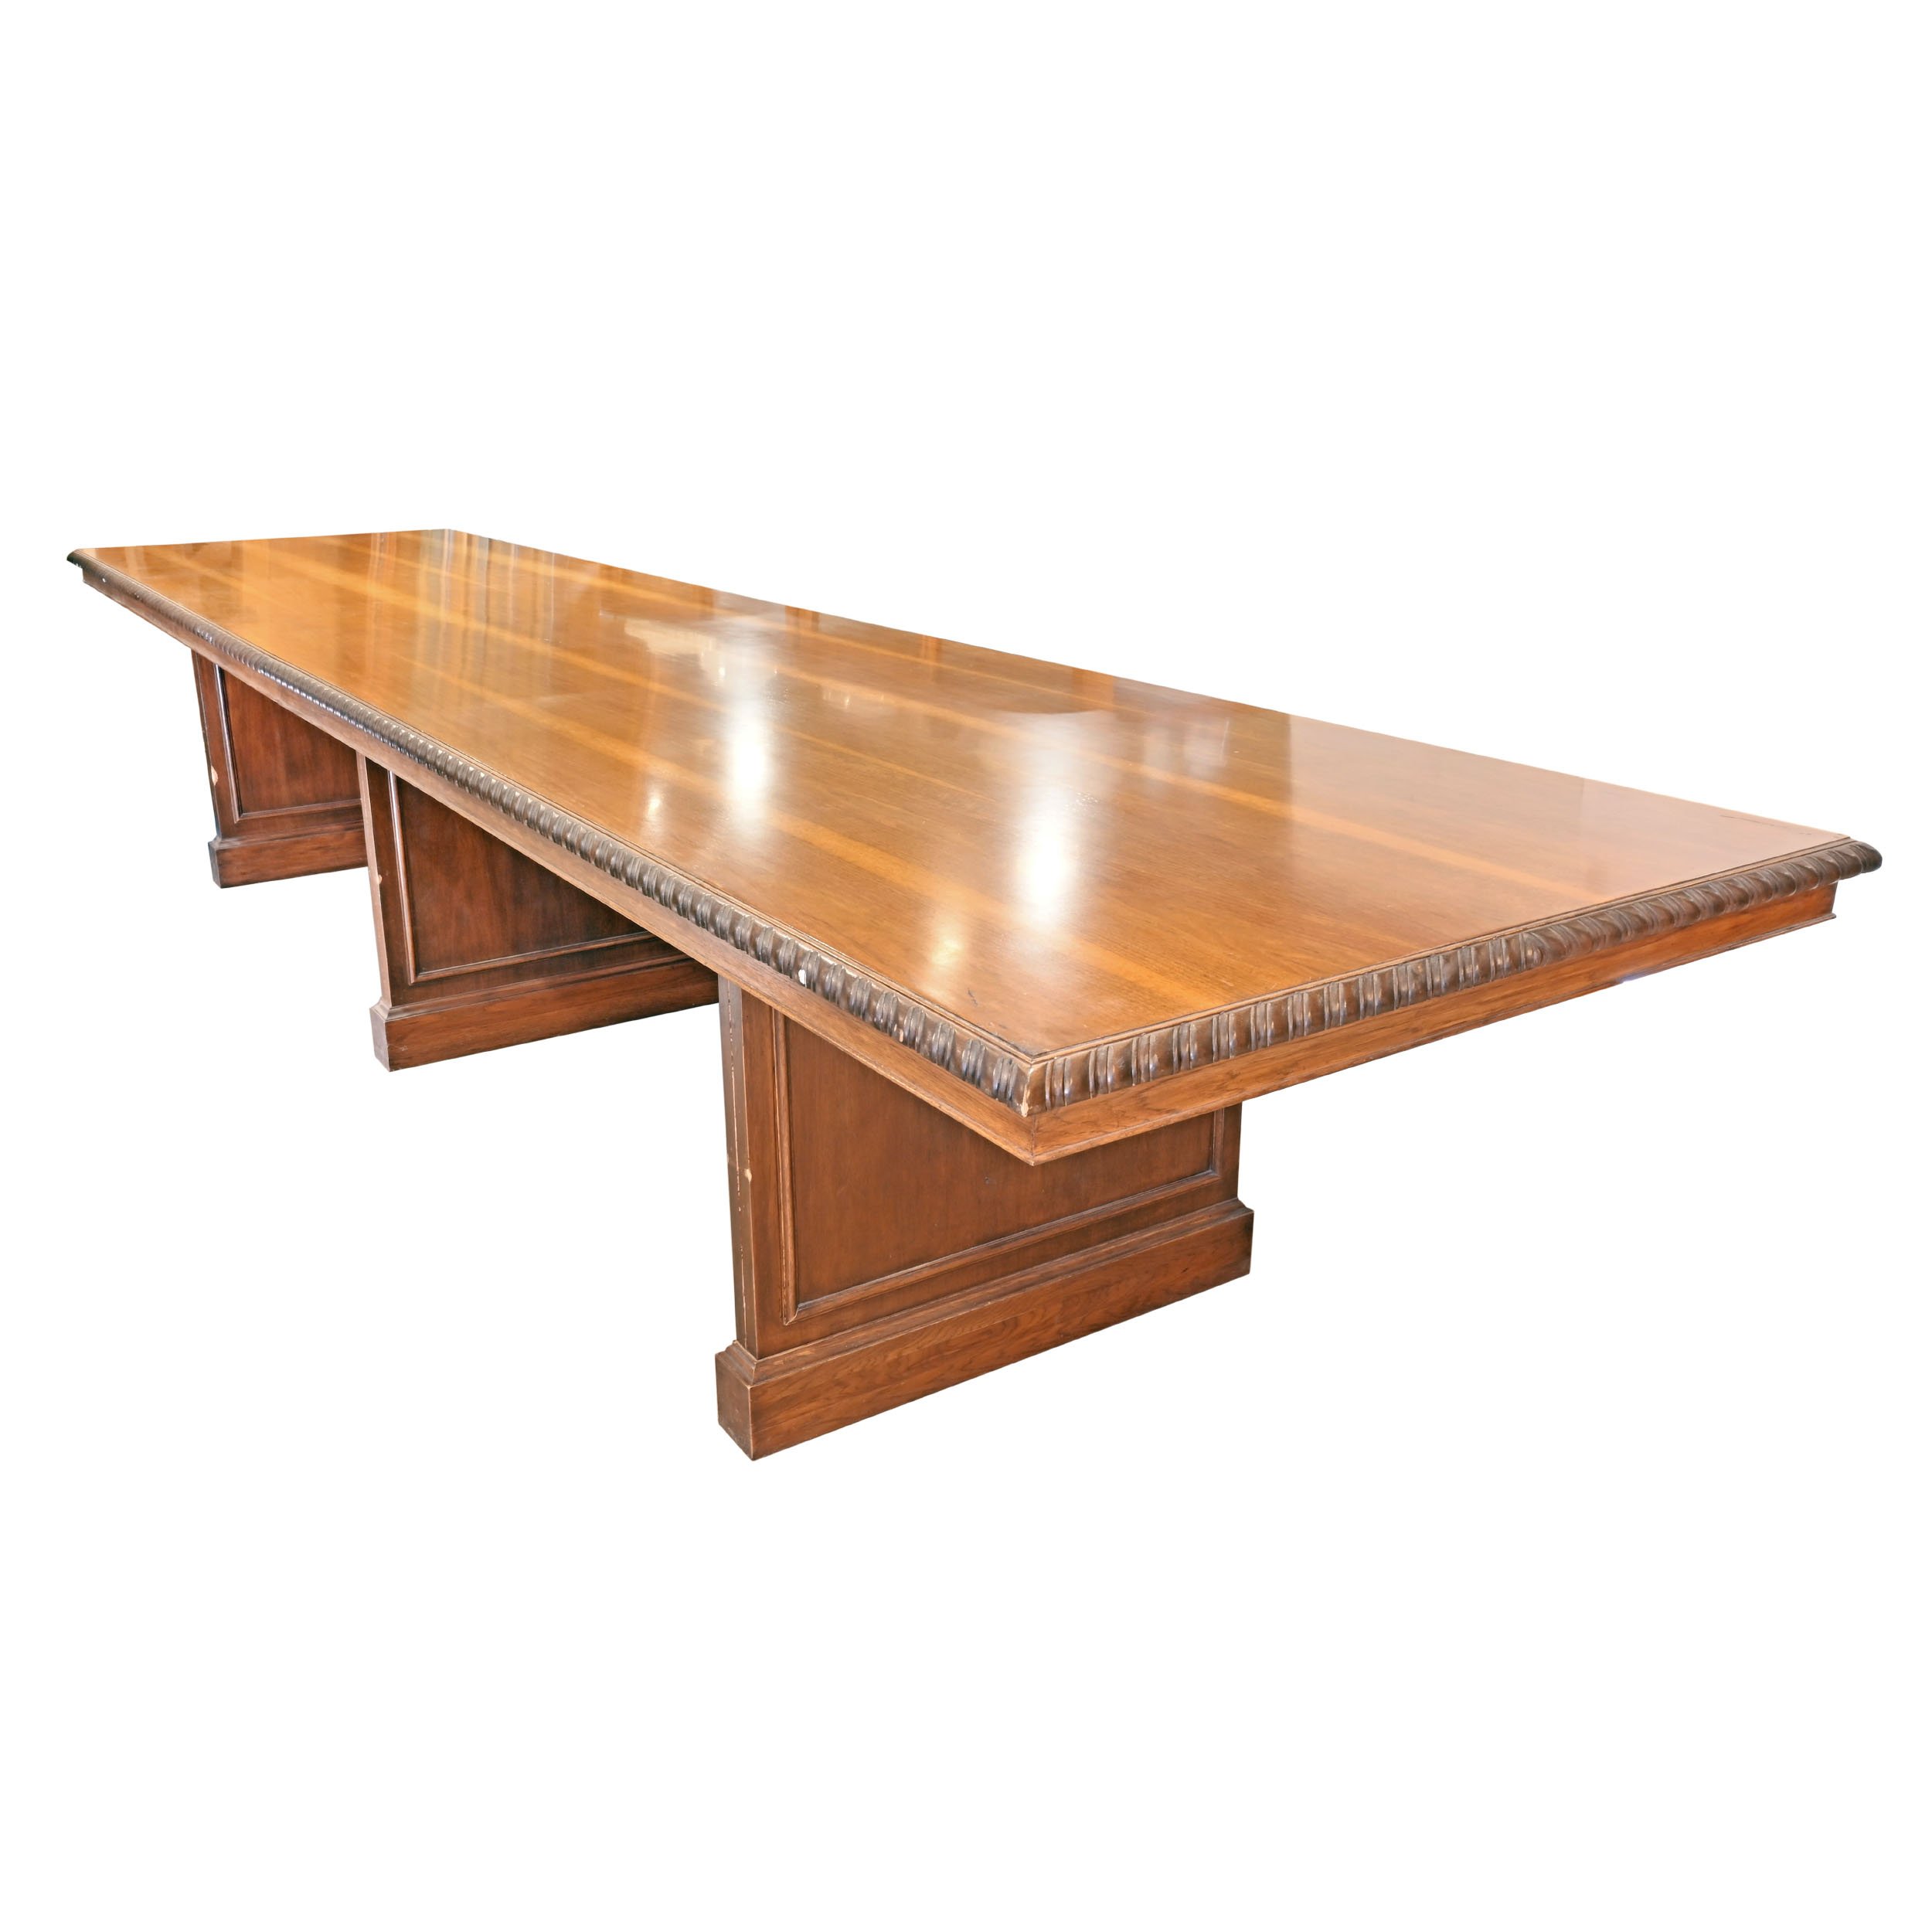 14 foot monreale rope edged walnut conference table